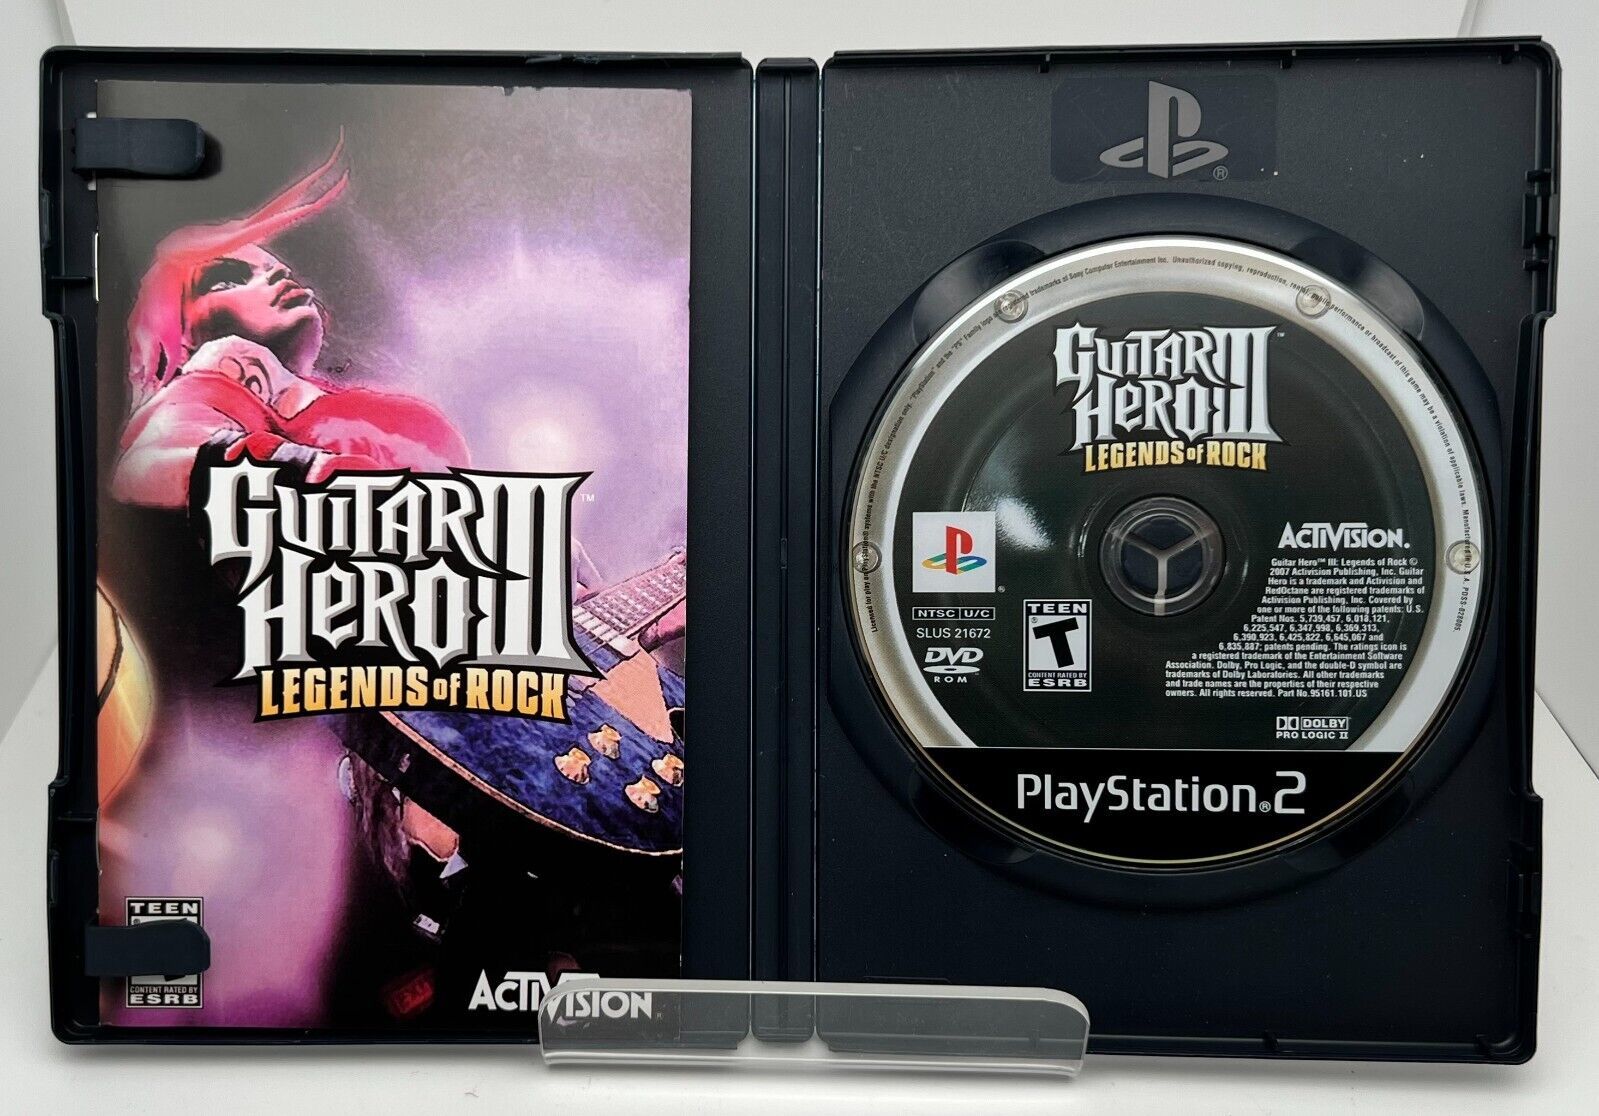 Primary image for Guitar Hero III: Legends Of Rock (Sony Playstation 2/PS2) - COMPLETE/CIB/TESTED